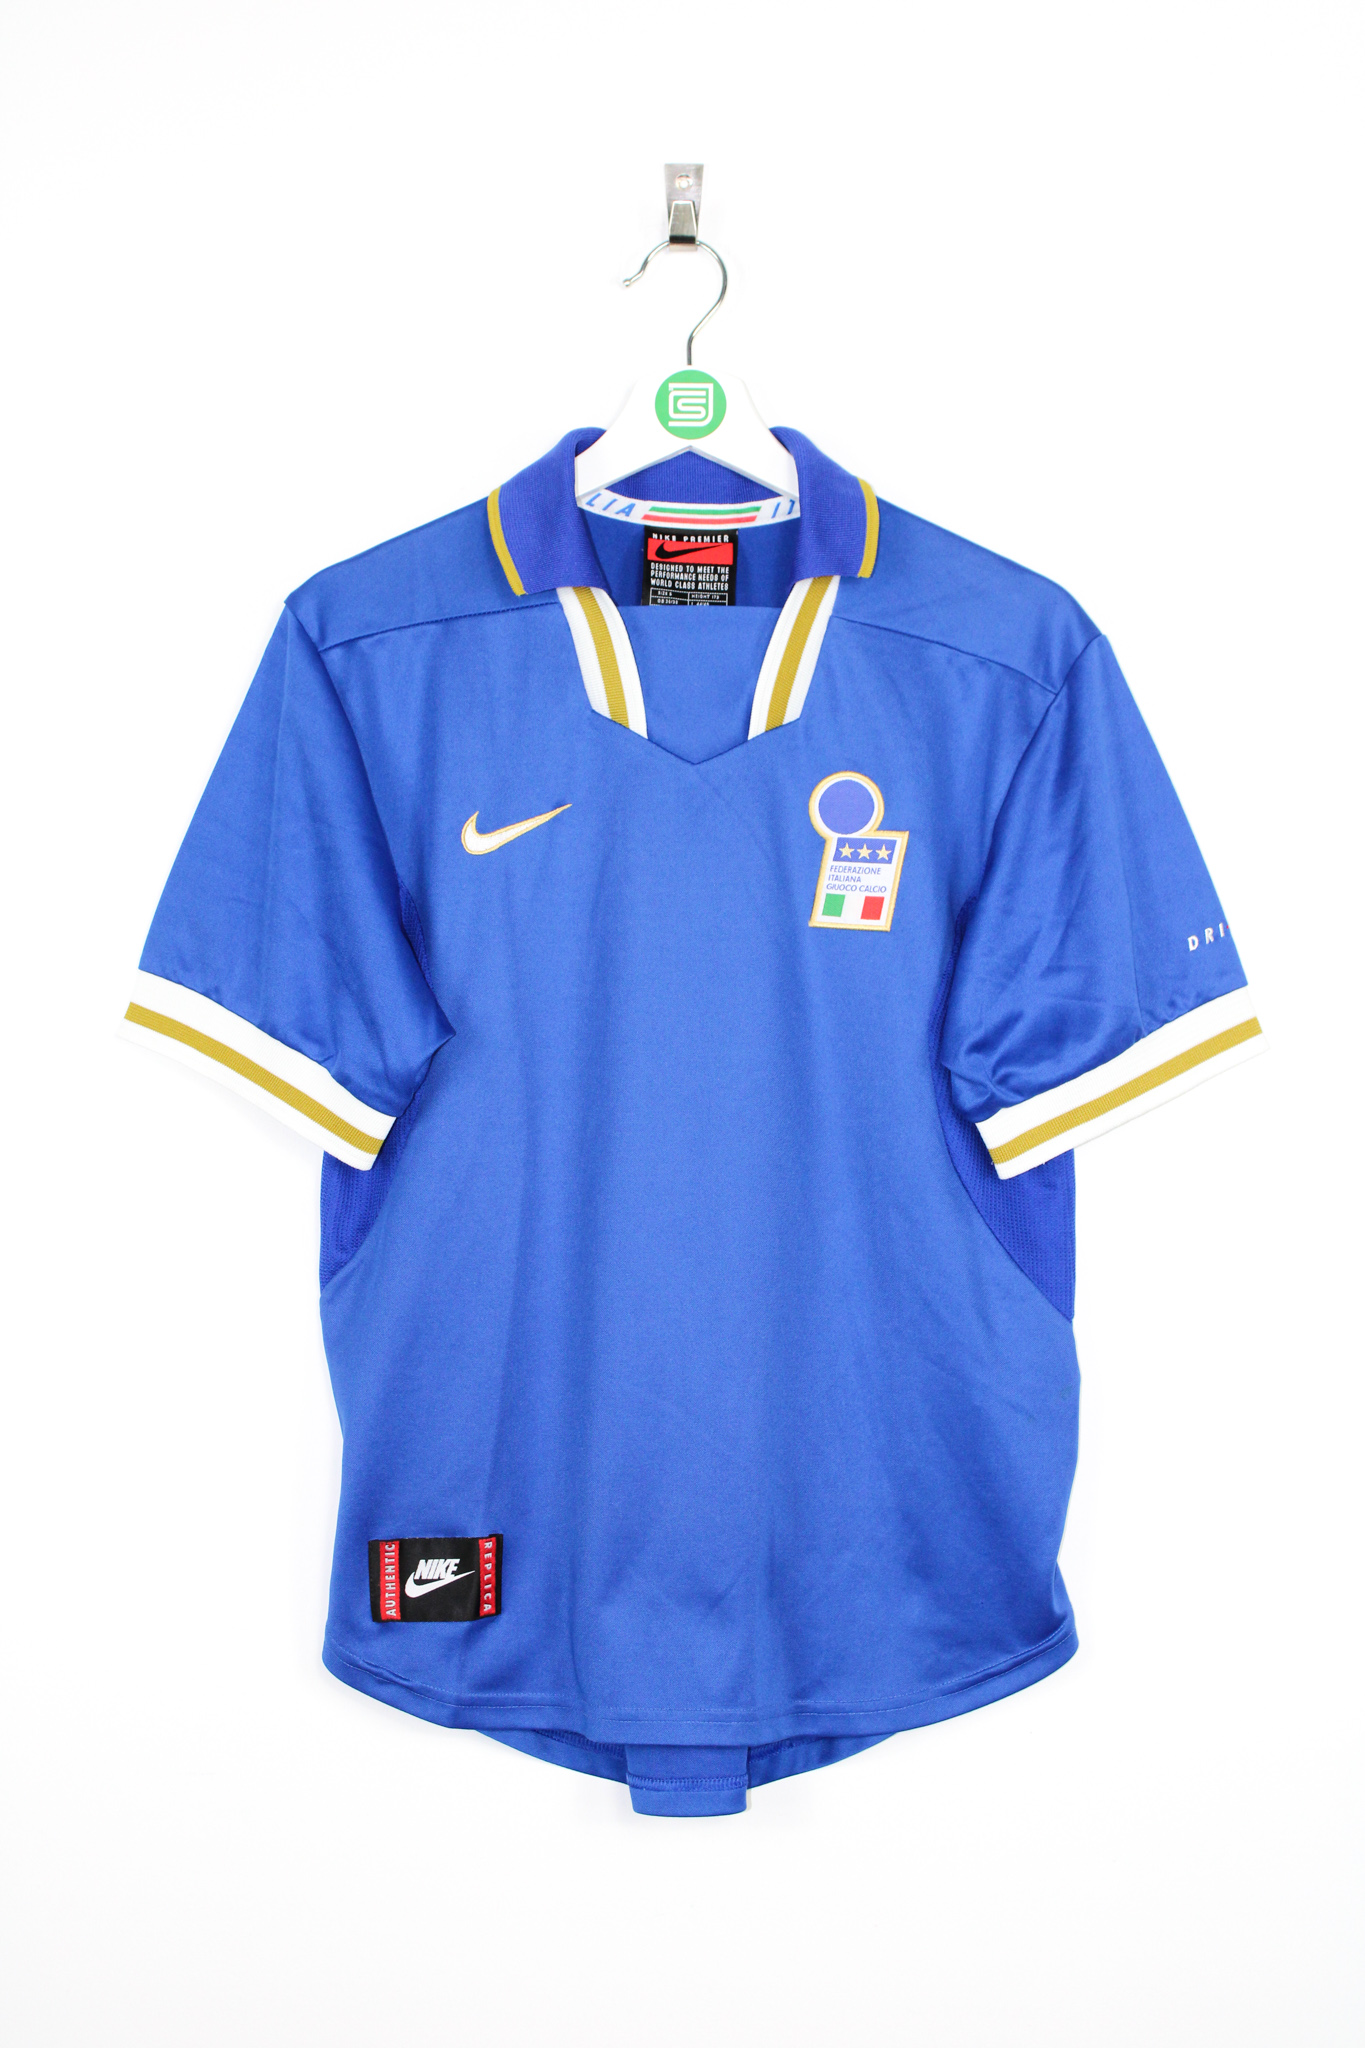 italy-1996-97-home-shirt-s-rb-classic-soccer-jerseys